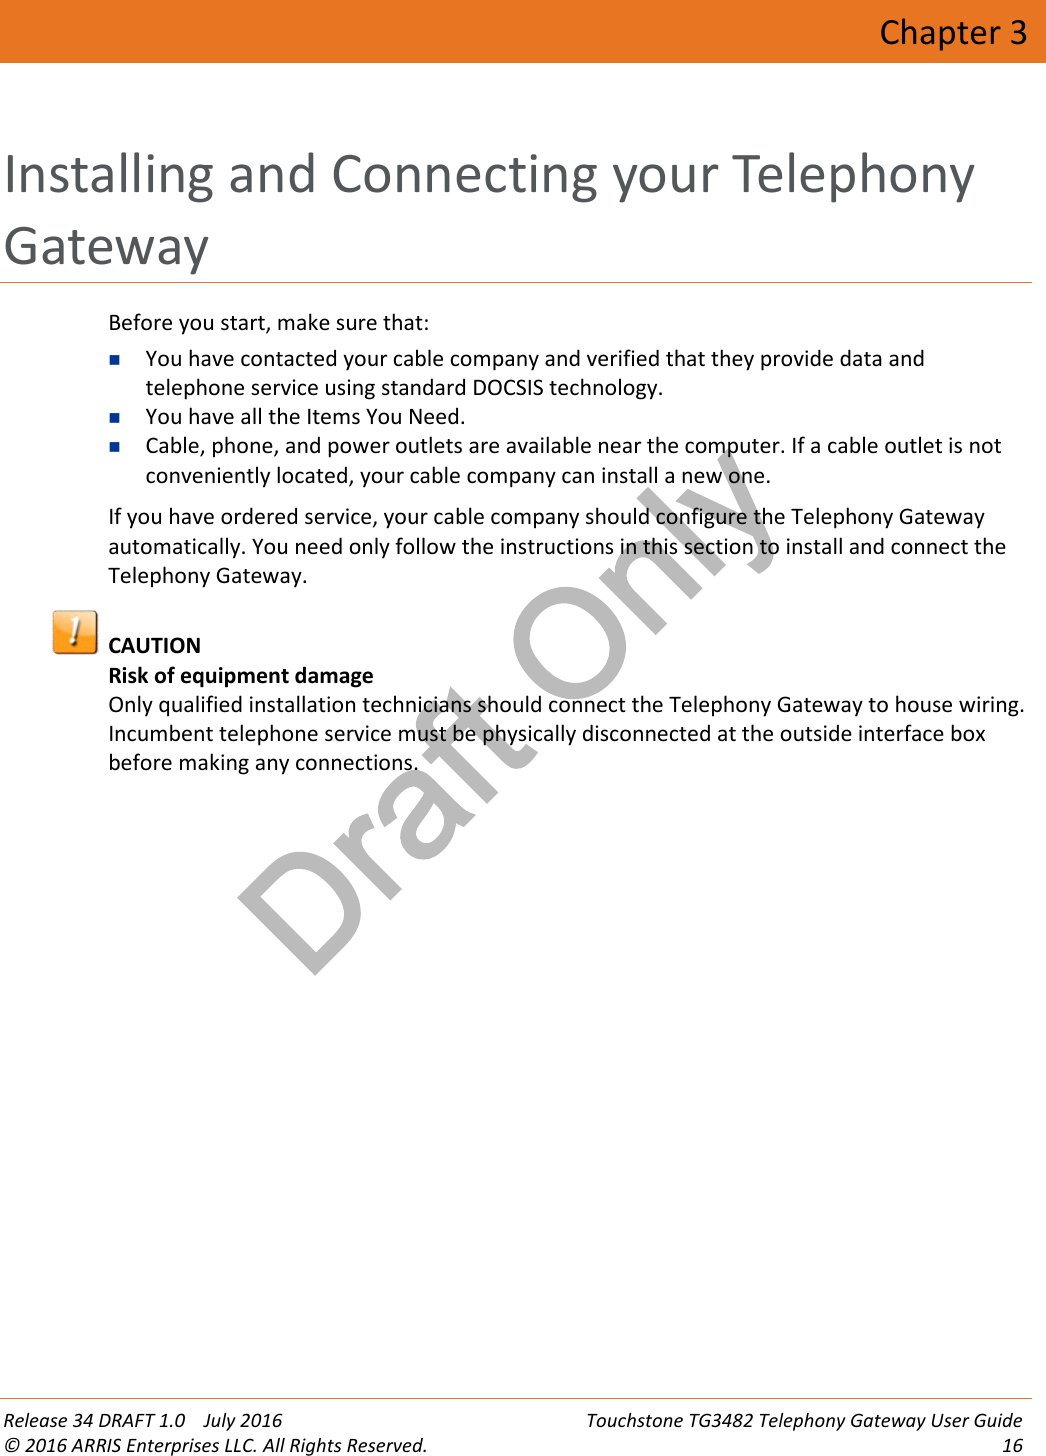 Draft OnlyRelease 34 DRAFT 1.0 July 2016 Touchstone TG3482 Telephony Gateway User Guide© 2016 ARRIS Enterprises LLC. All Rights Reserved. 16Chapter 3Installing and Connecting your TelephonyGatewayBefore you start, make sure that:You have contacted your cable company and verified that they provide data andtelephone service using standard DOCSIS technology.You have all the Items You Need.Cable, phone, and power outlets are available near the computer. If a cable outlet is notconveniently located, your cable company can install a new one.If you have ordered service, your cable company should configure the Telephony Gatewayautomatically. You need only follow the instructions in this section to install and connect theTelephony Gateway.CAUTIONRisk of equipment damageOnly qualified installation technicians should connect the Telephony Gateway to house wiring.Incumbent telephone service must be physically disconnected at the outside interface boxbefore making any connections.